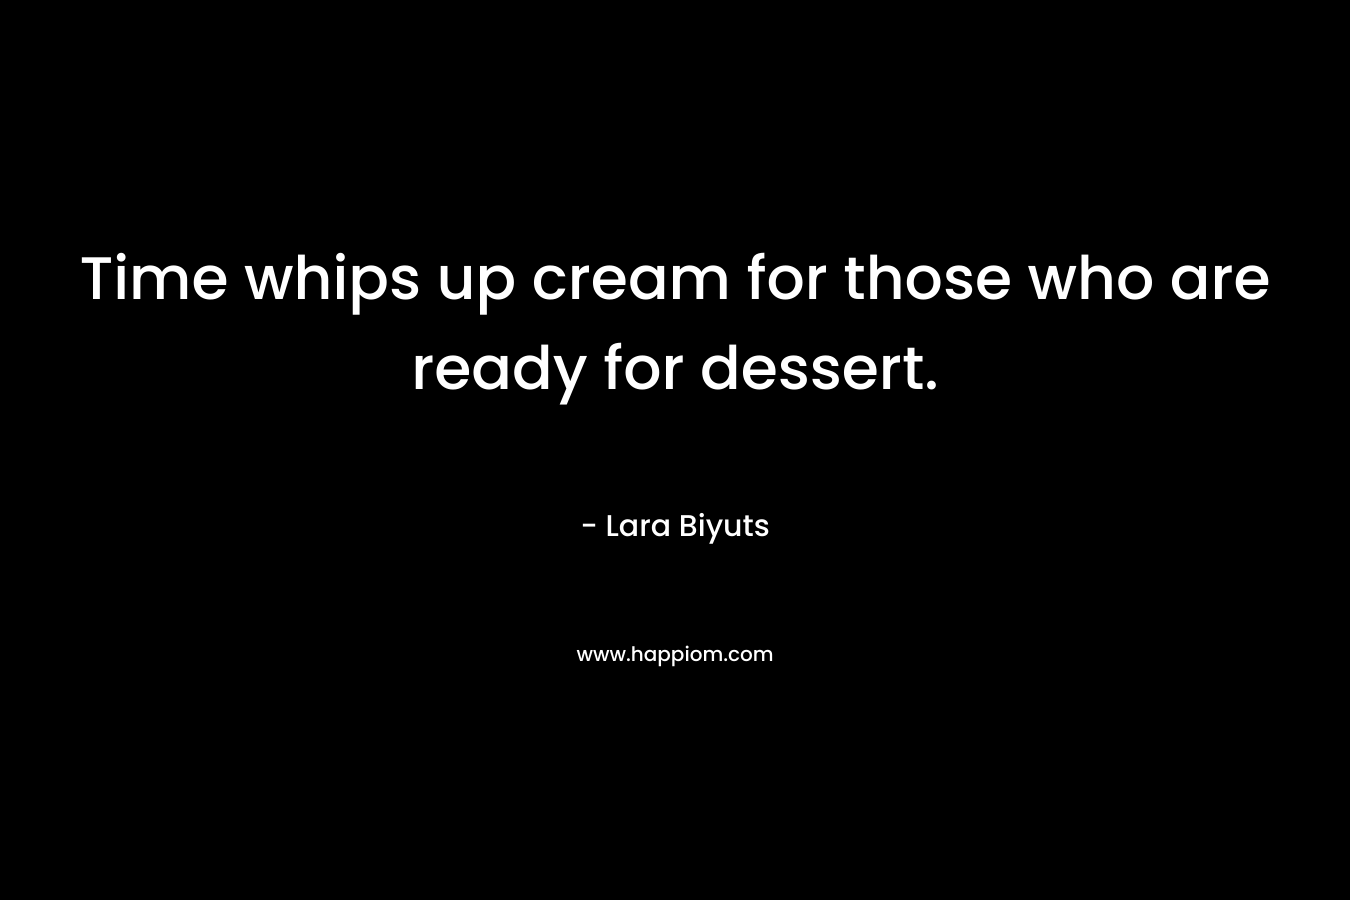 Time whips up cream for those who are ready for dessert.